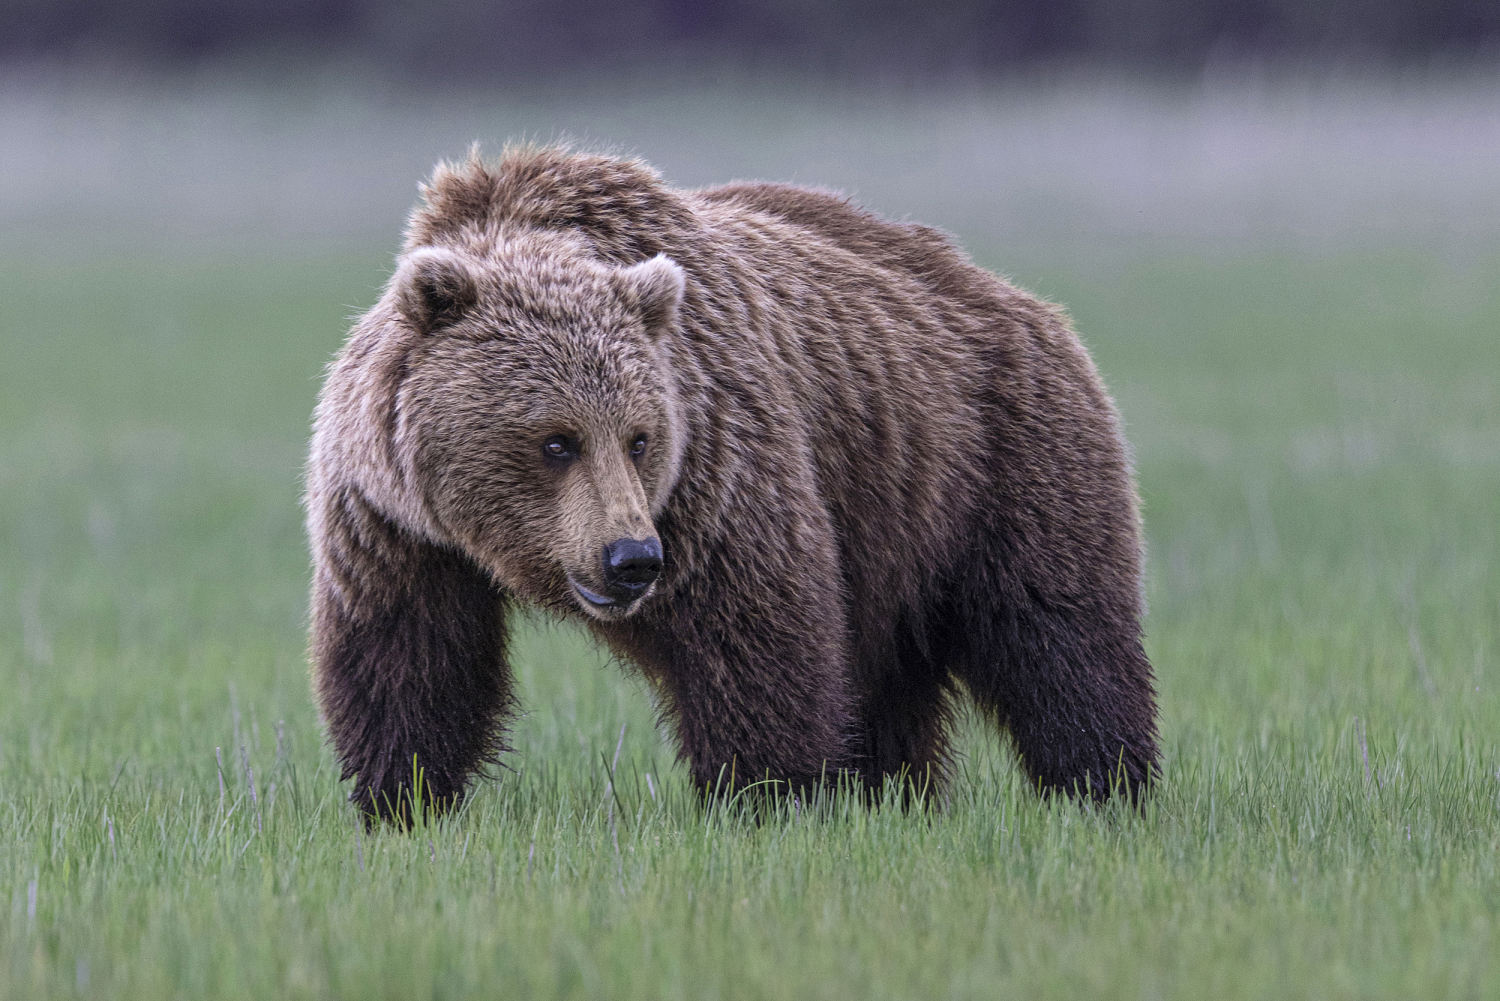 Grizzly bears are set to be reintroduced to Washington state, after years of debate